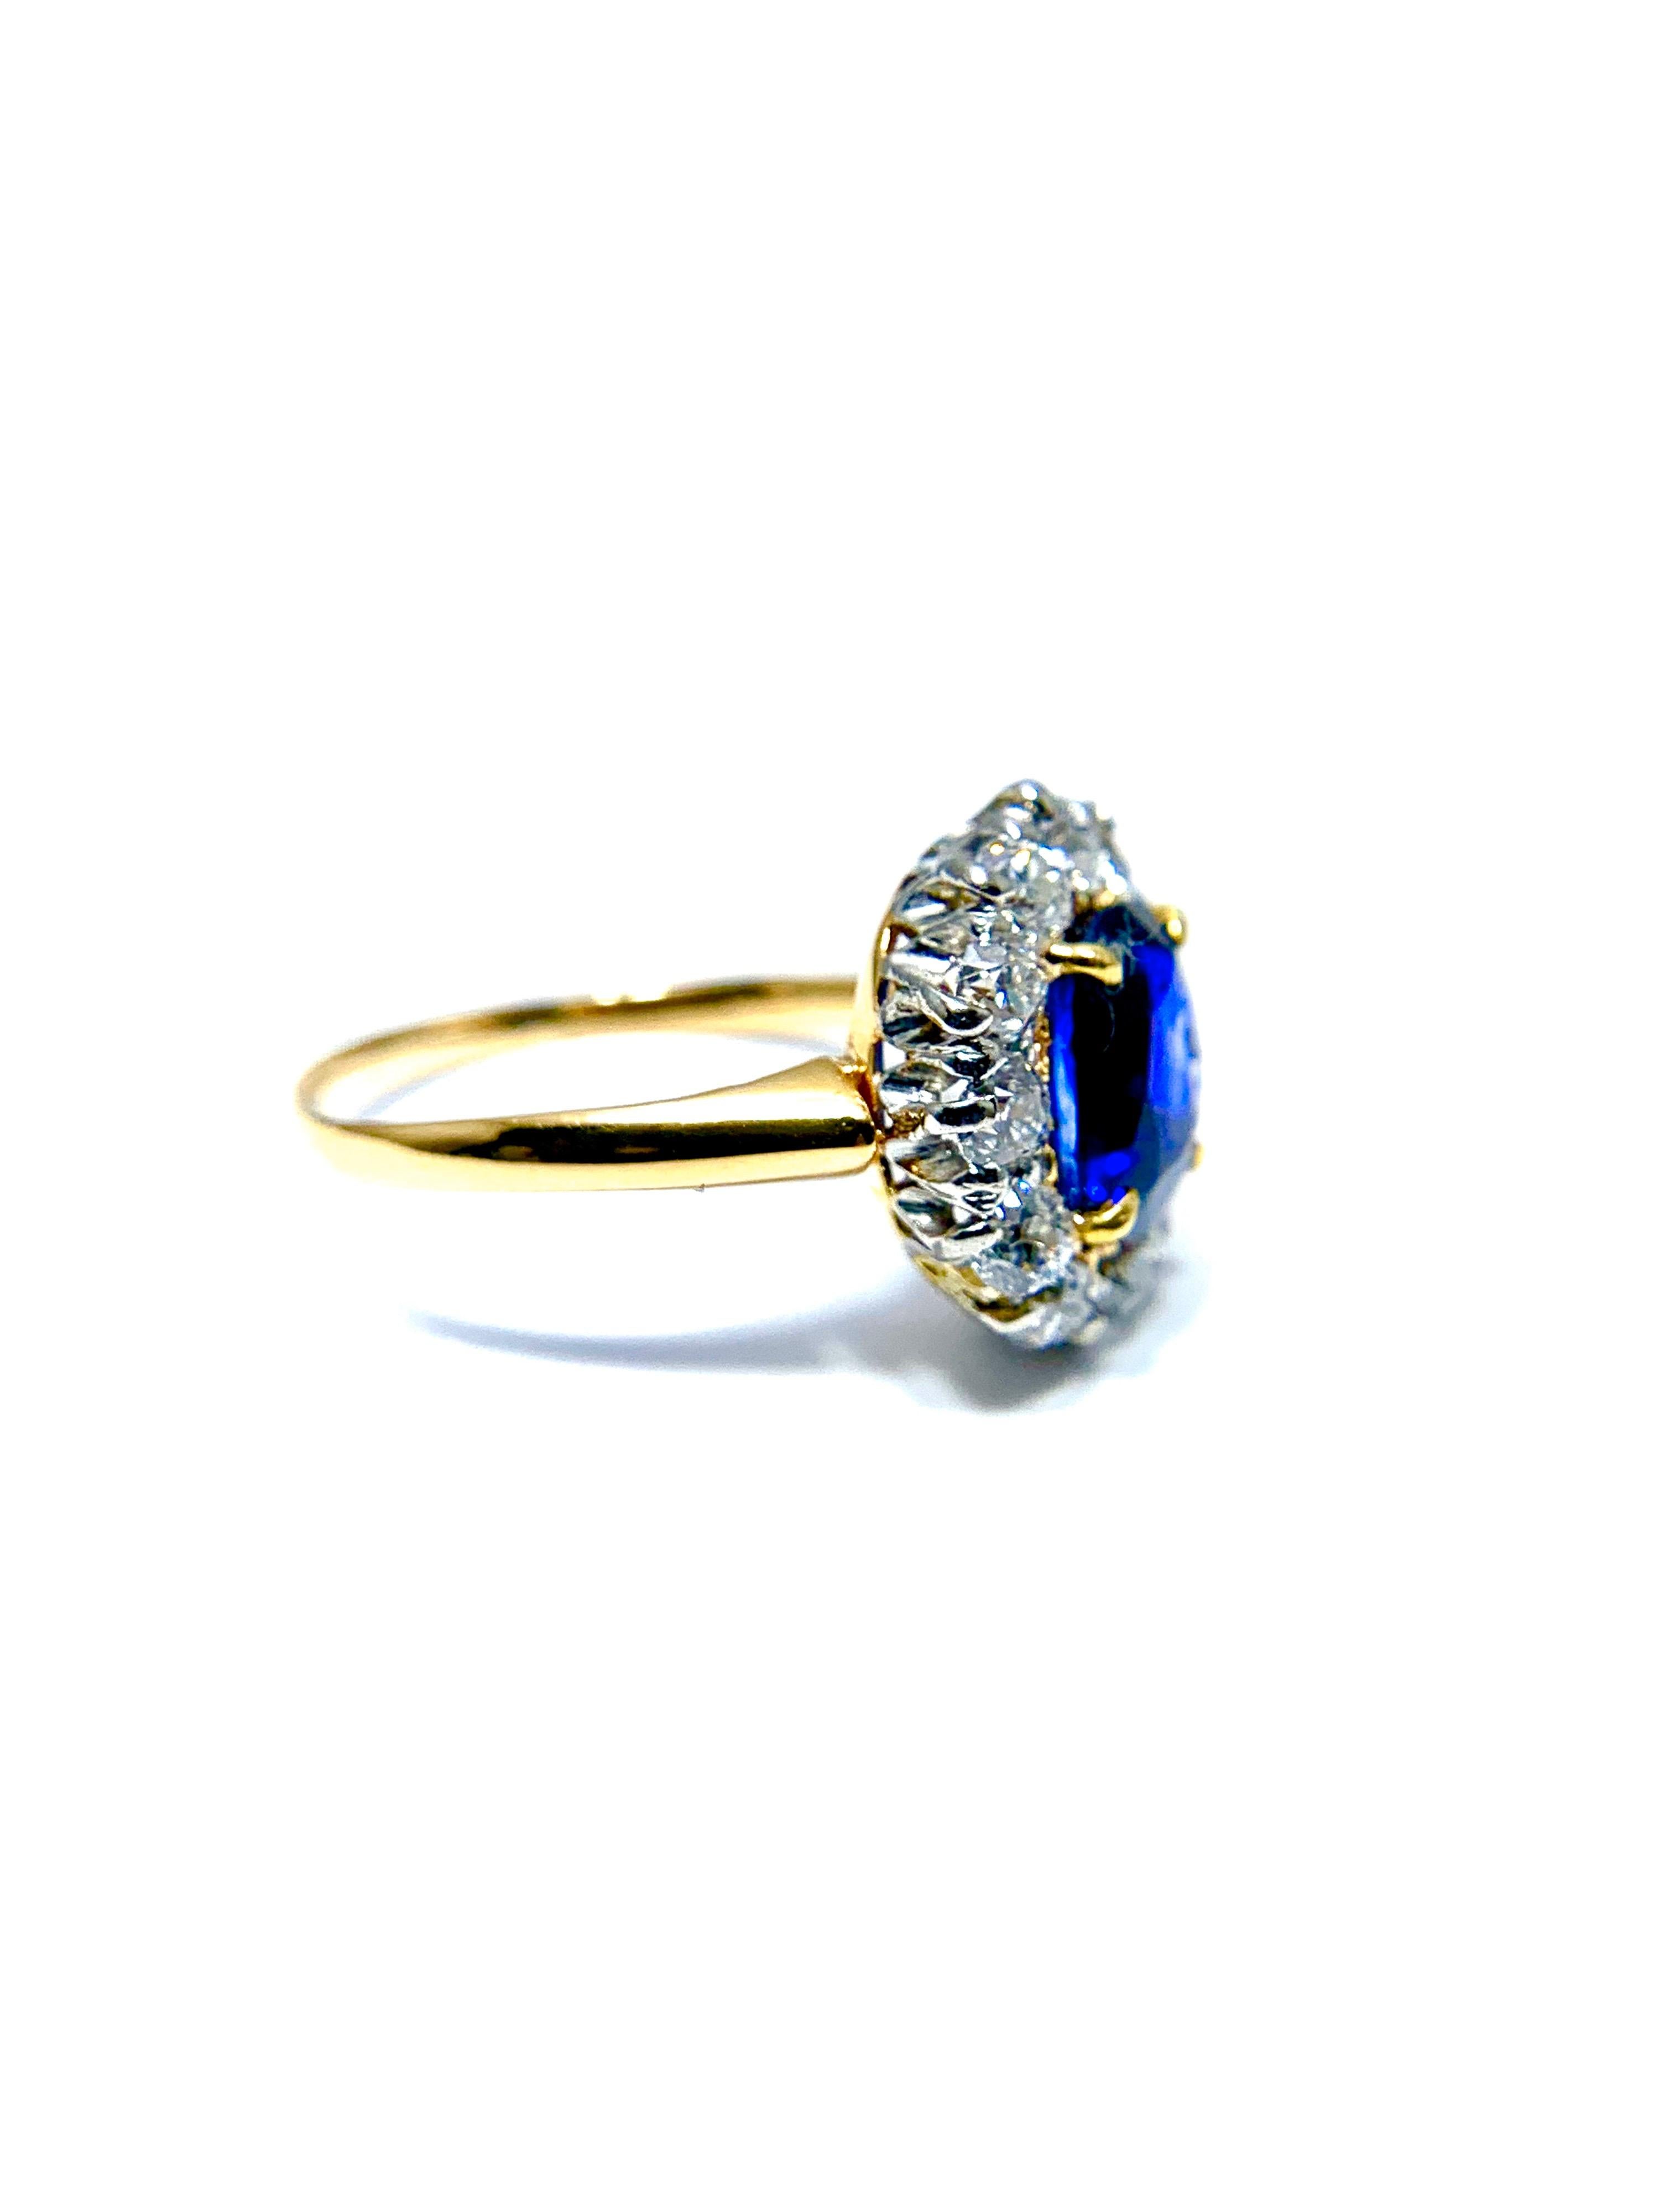 Oval Cut 2.63 Carat Oval No Heat Natural Sapphire and Diamond Platinum and Yellow Gold